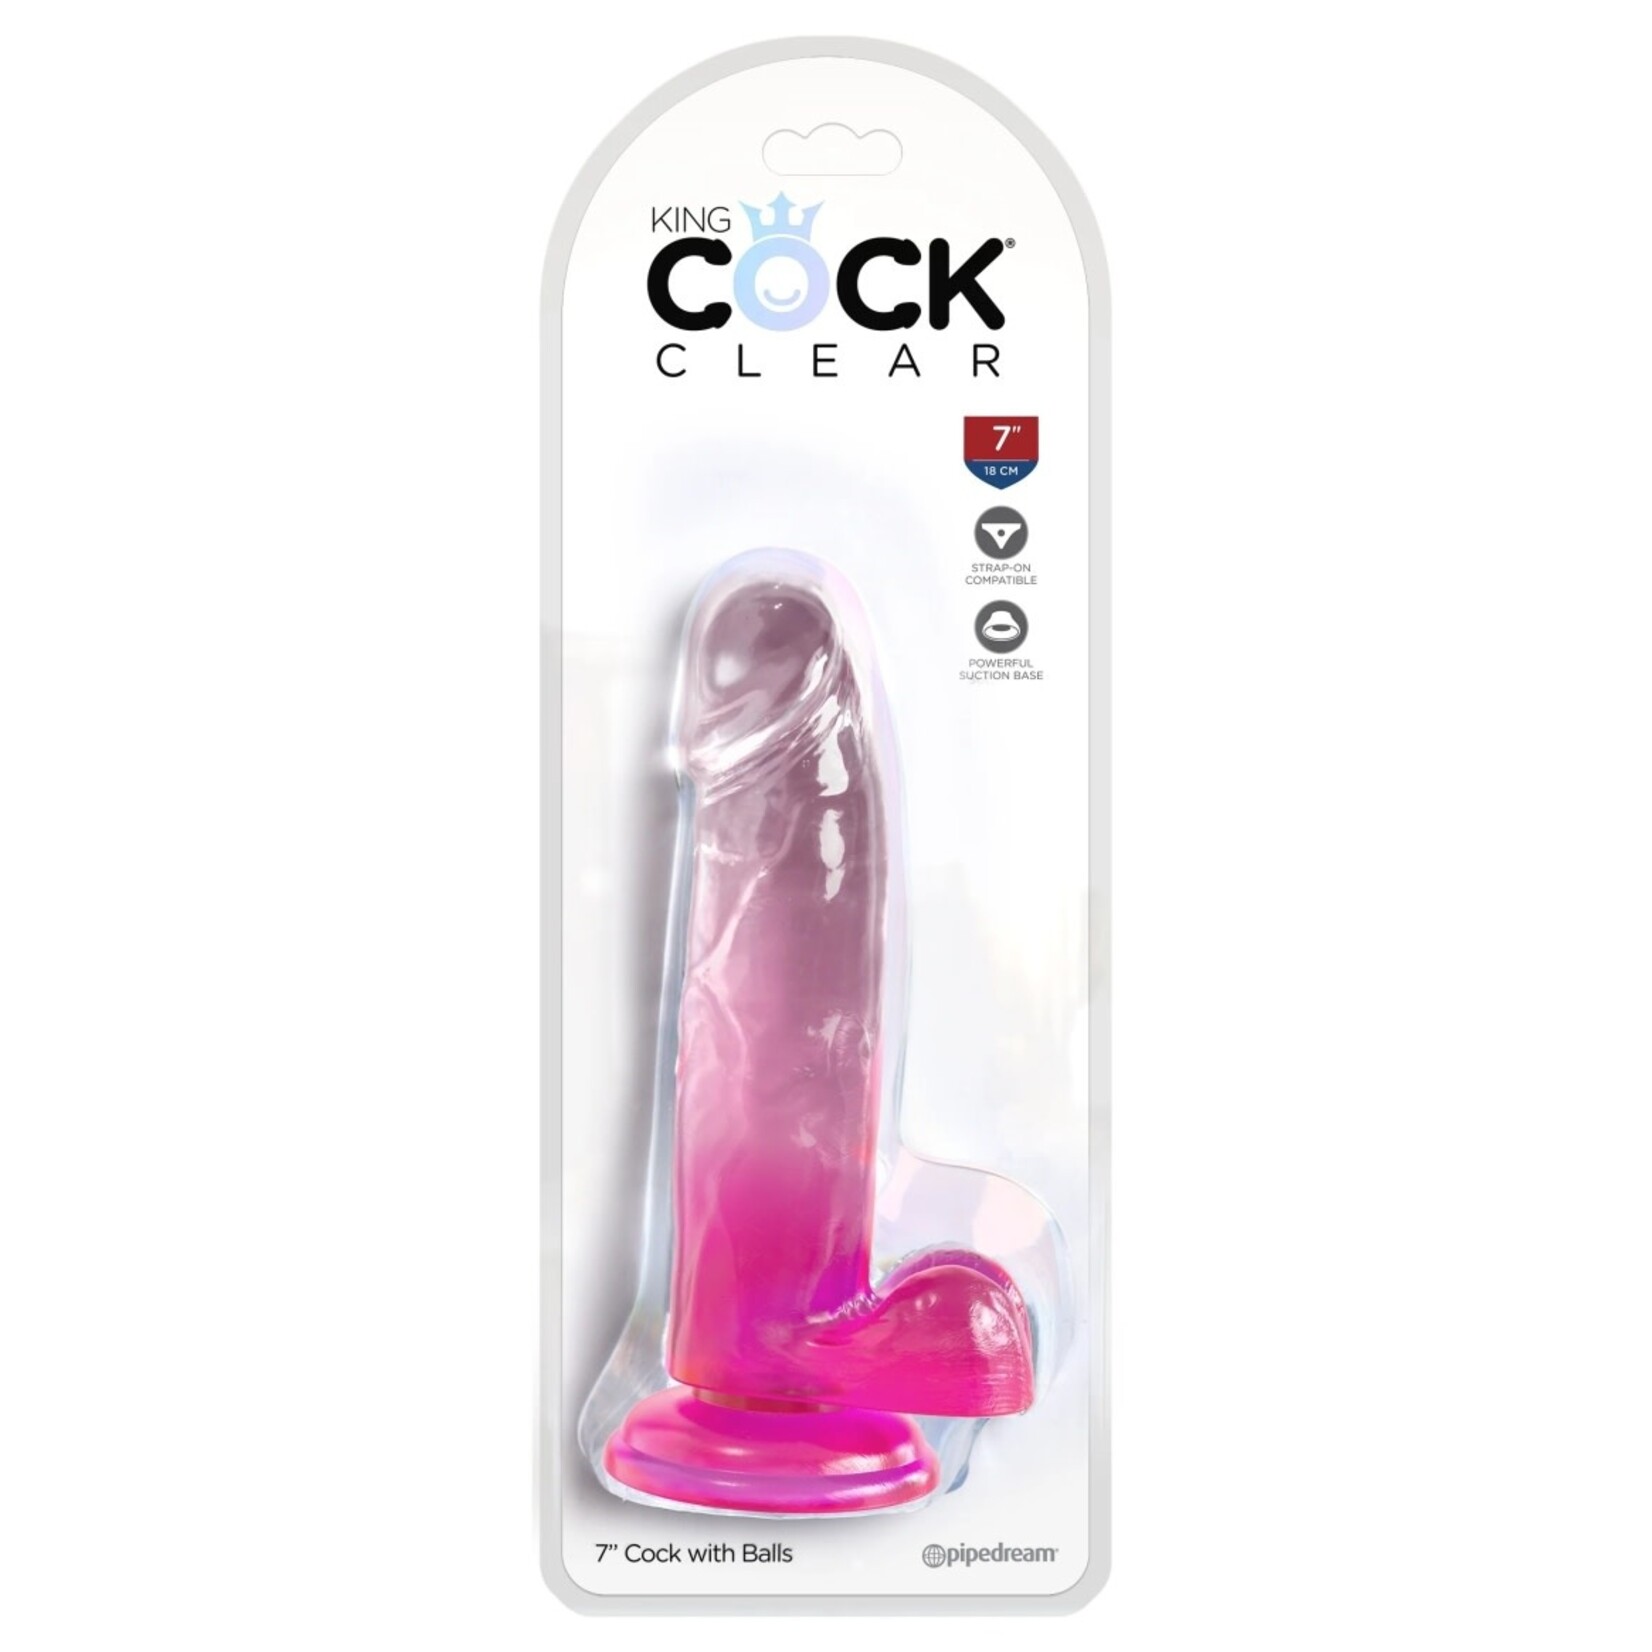 KING COCK KING COCK CLEAR 7" COCK WITH BALLS - PINK